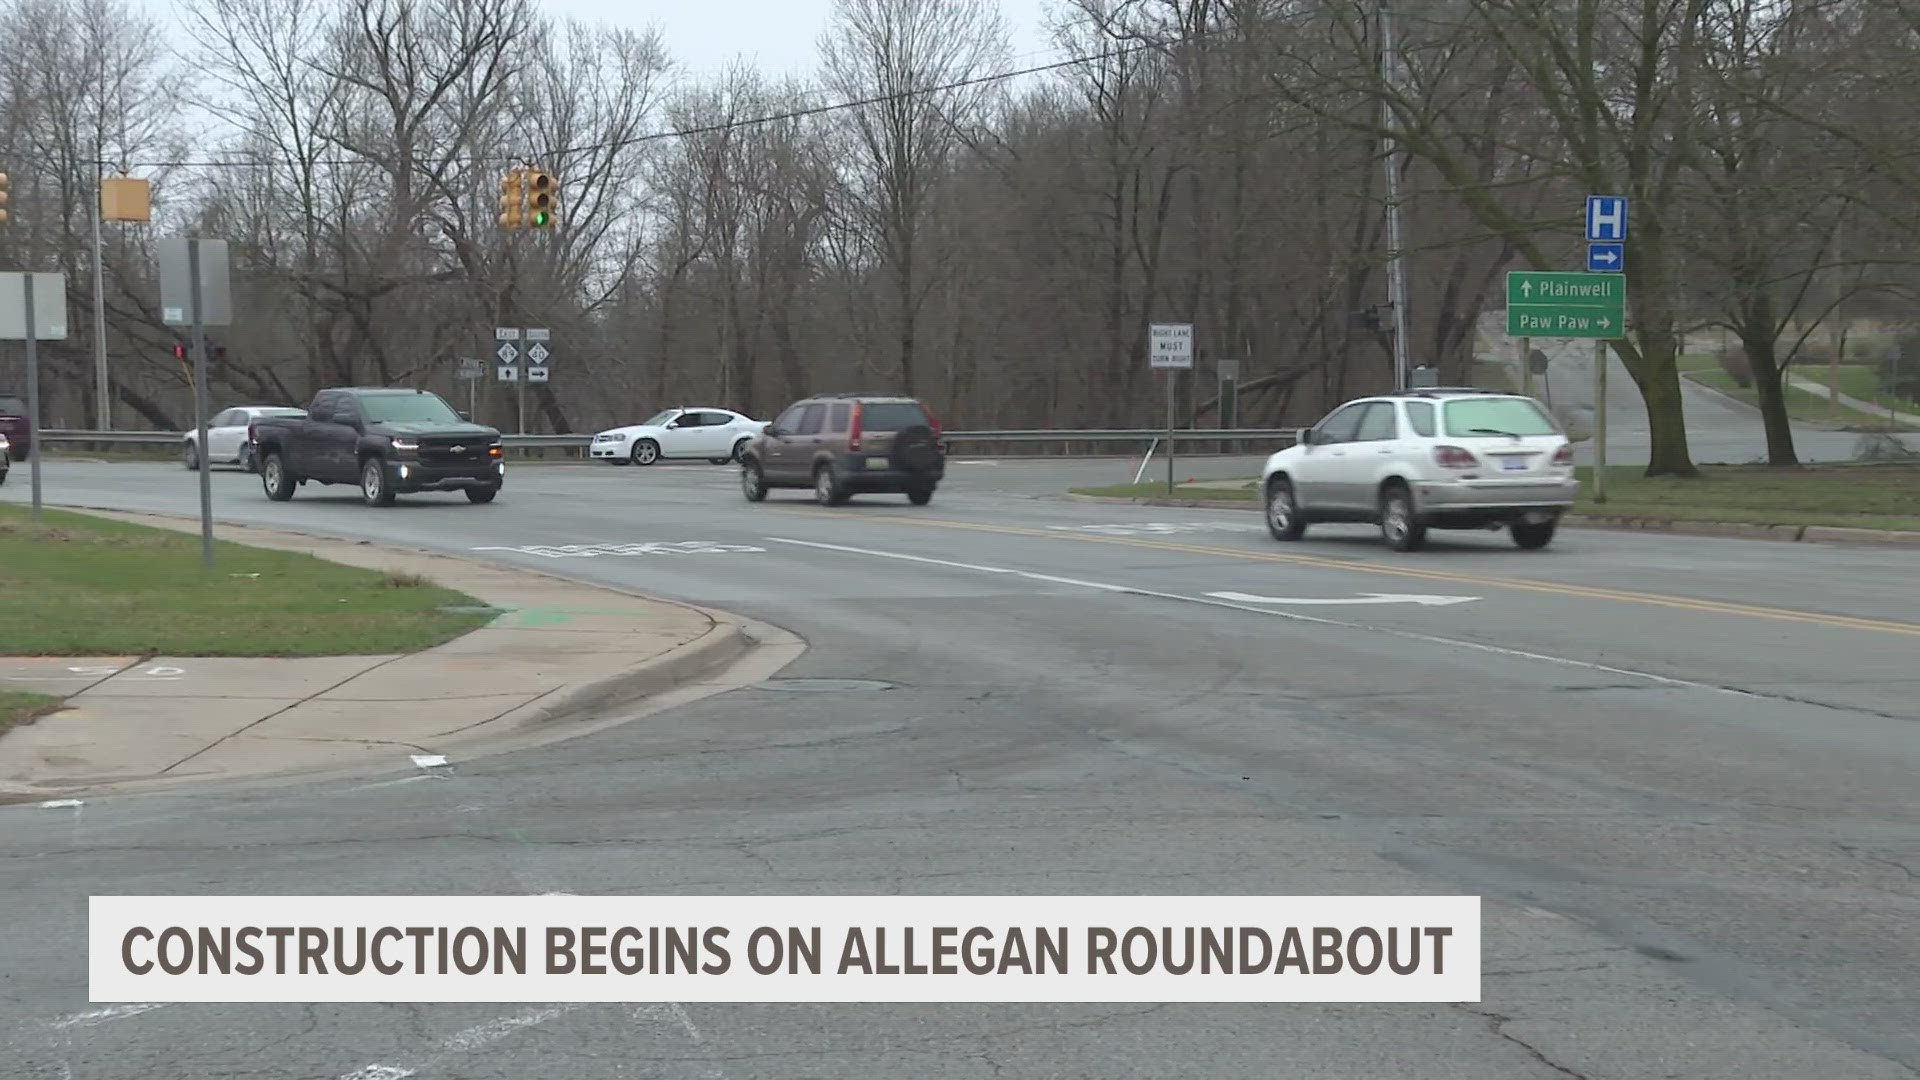 MDOT says the new $7 million roundabout will improve commutes, make the roads last longer and improve safety.